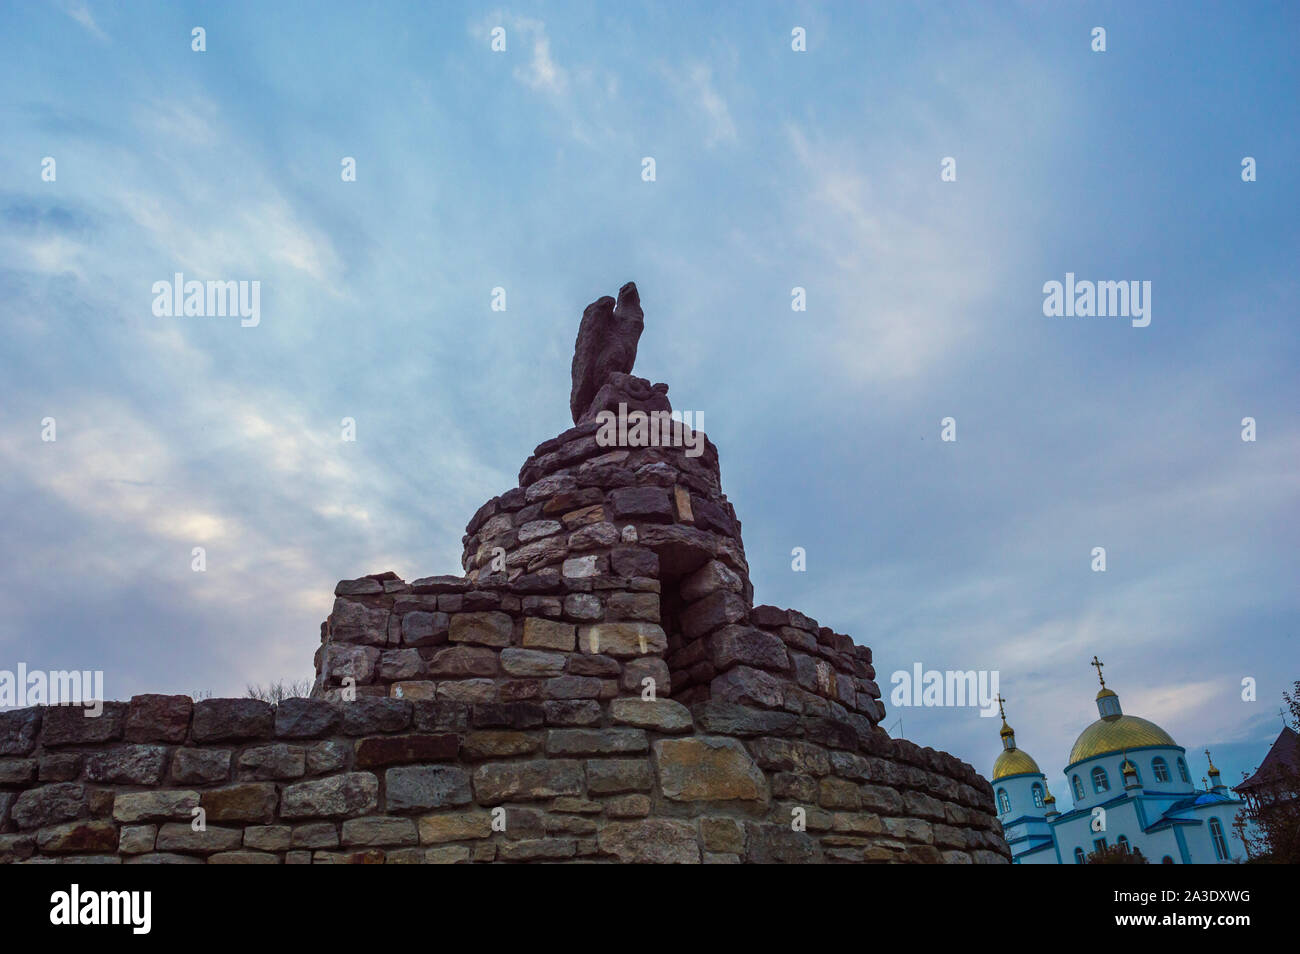 Eagle Sculpture on Top of Medieval Stone Wall  on Background fo Blue Sky Stock Photo